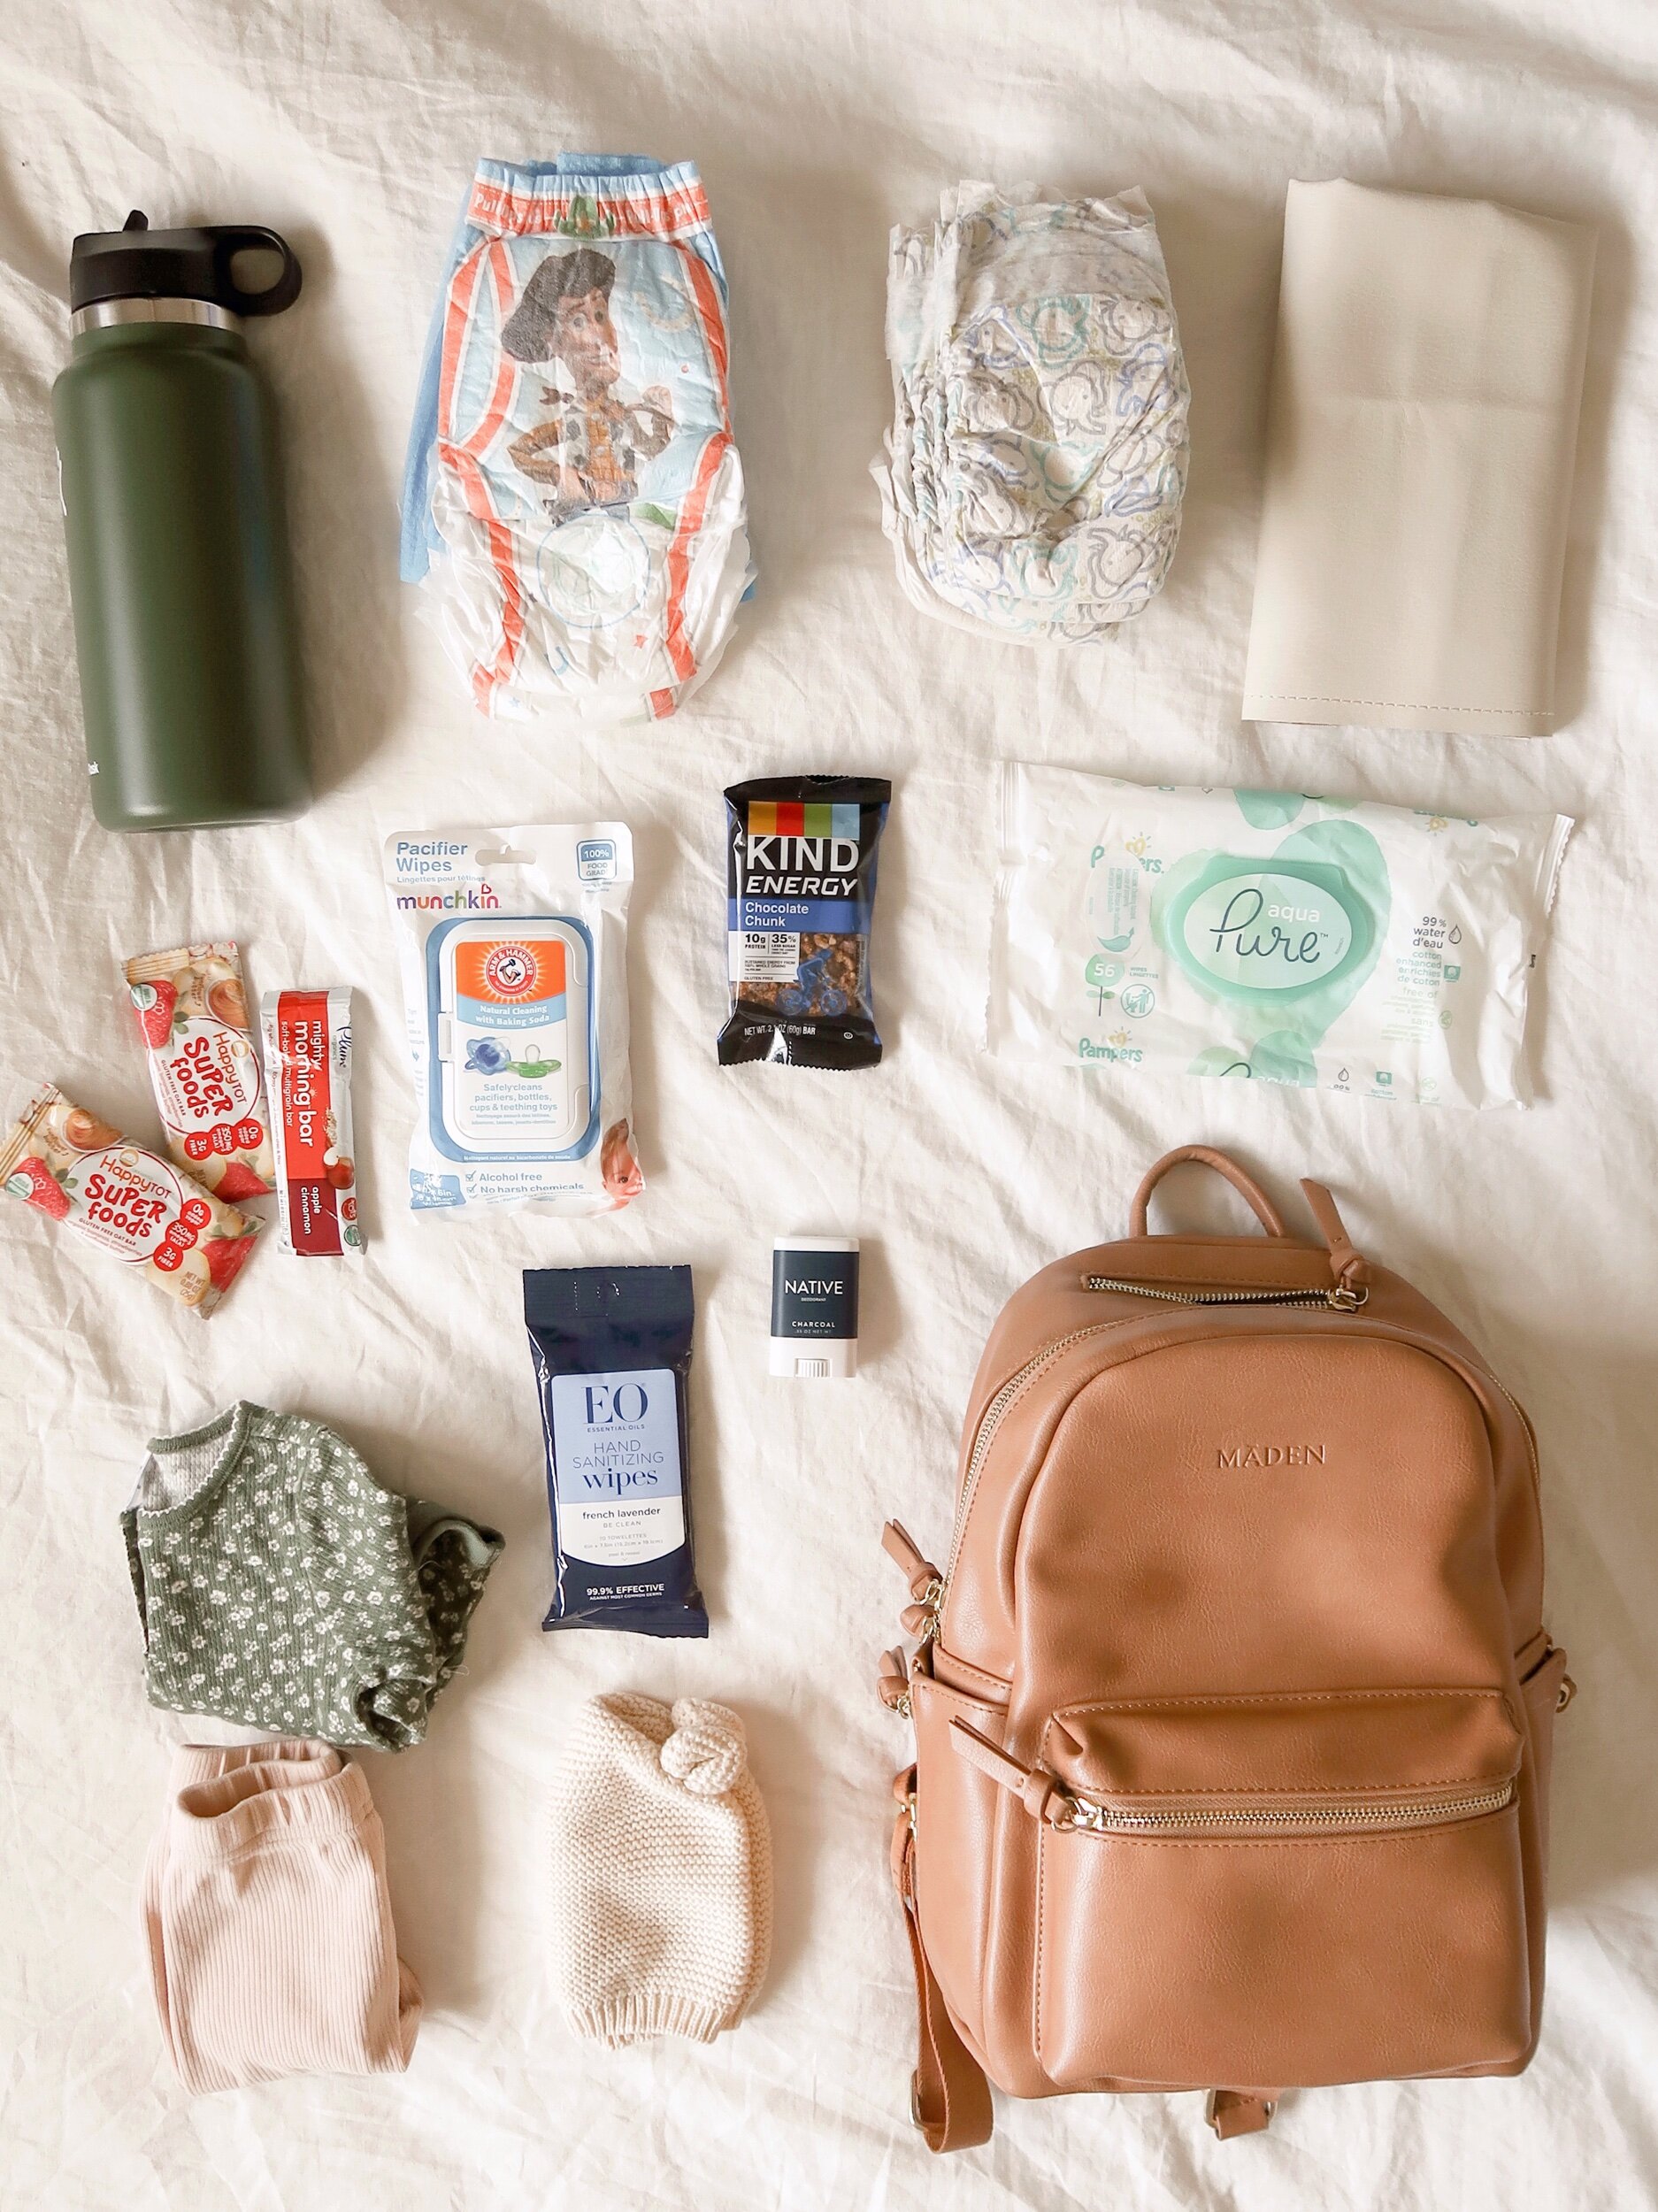 What's Inside My Fashionable Diaper Bag 